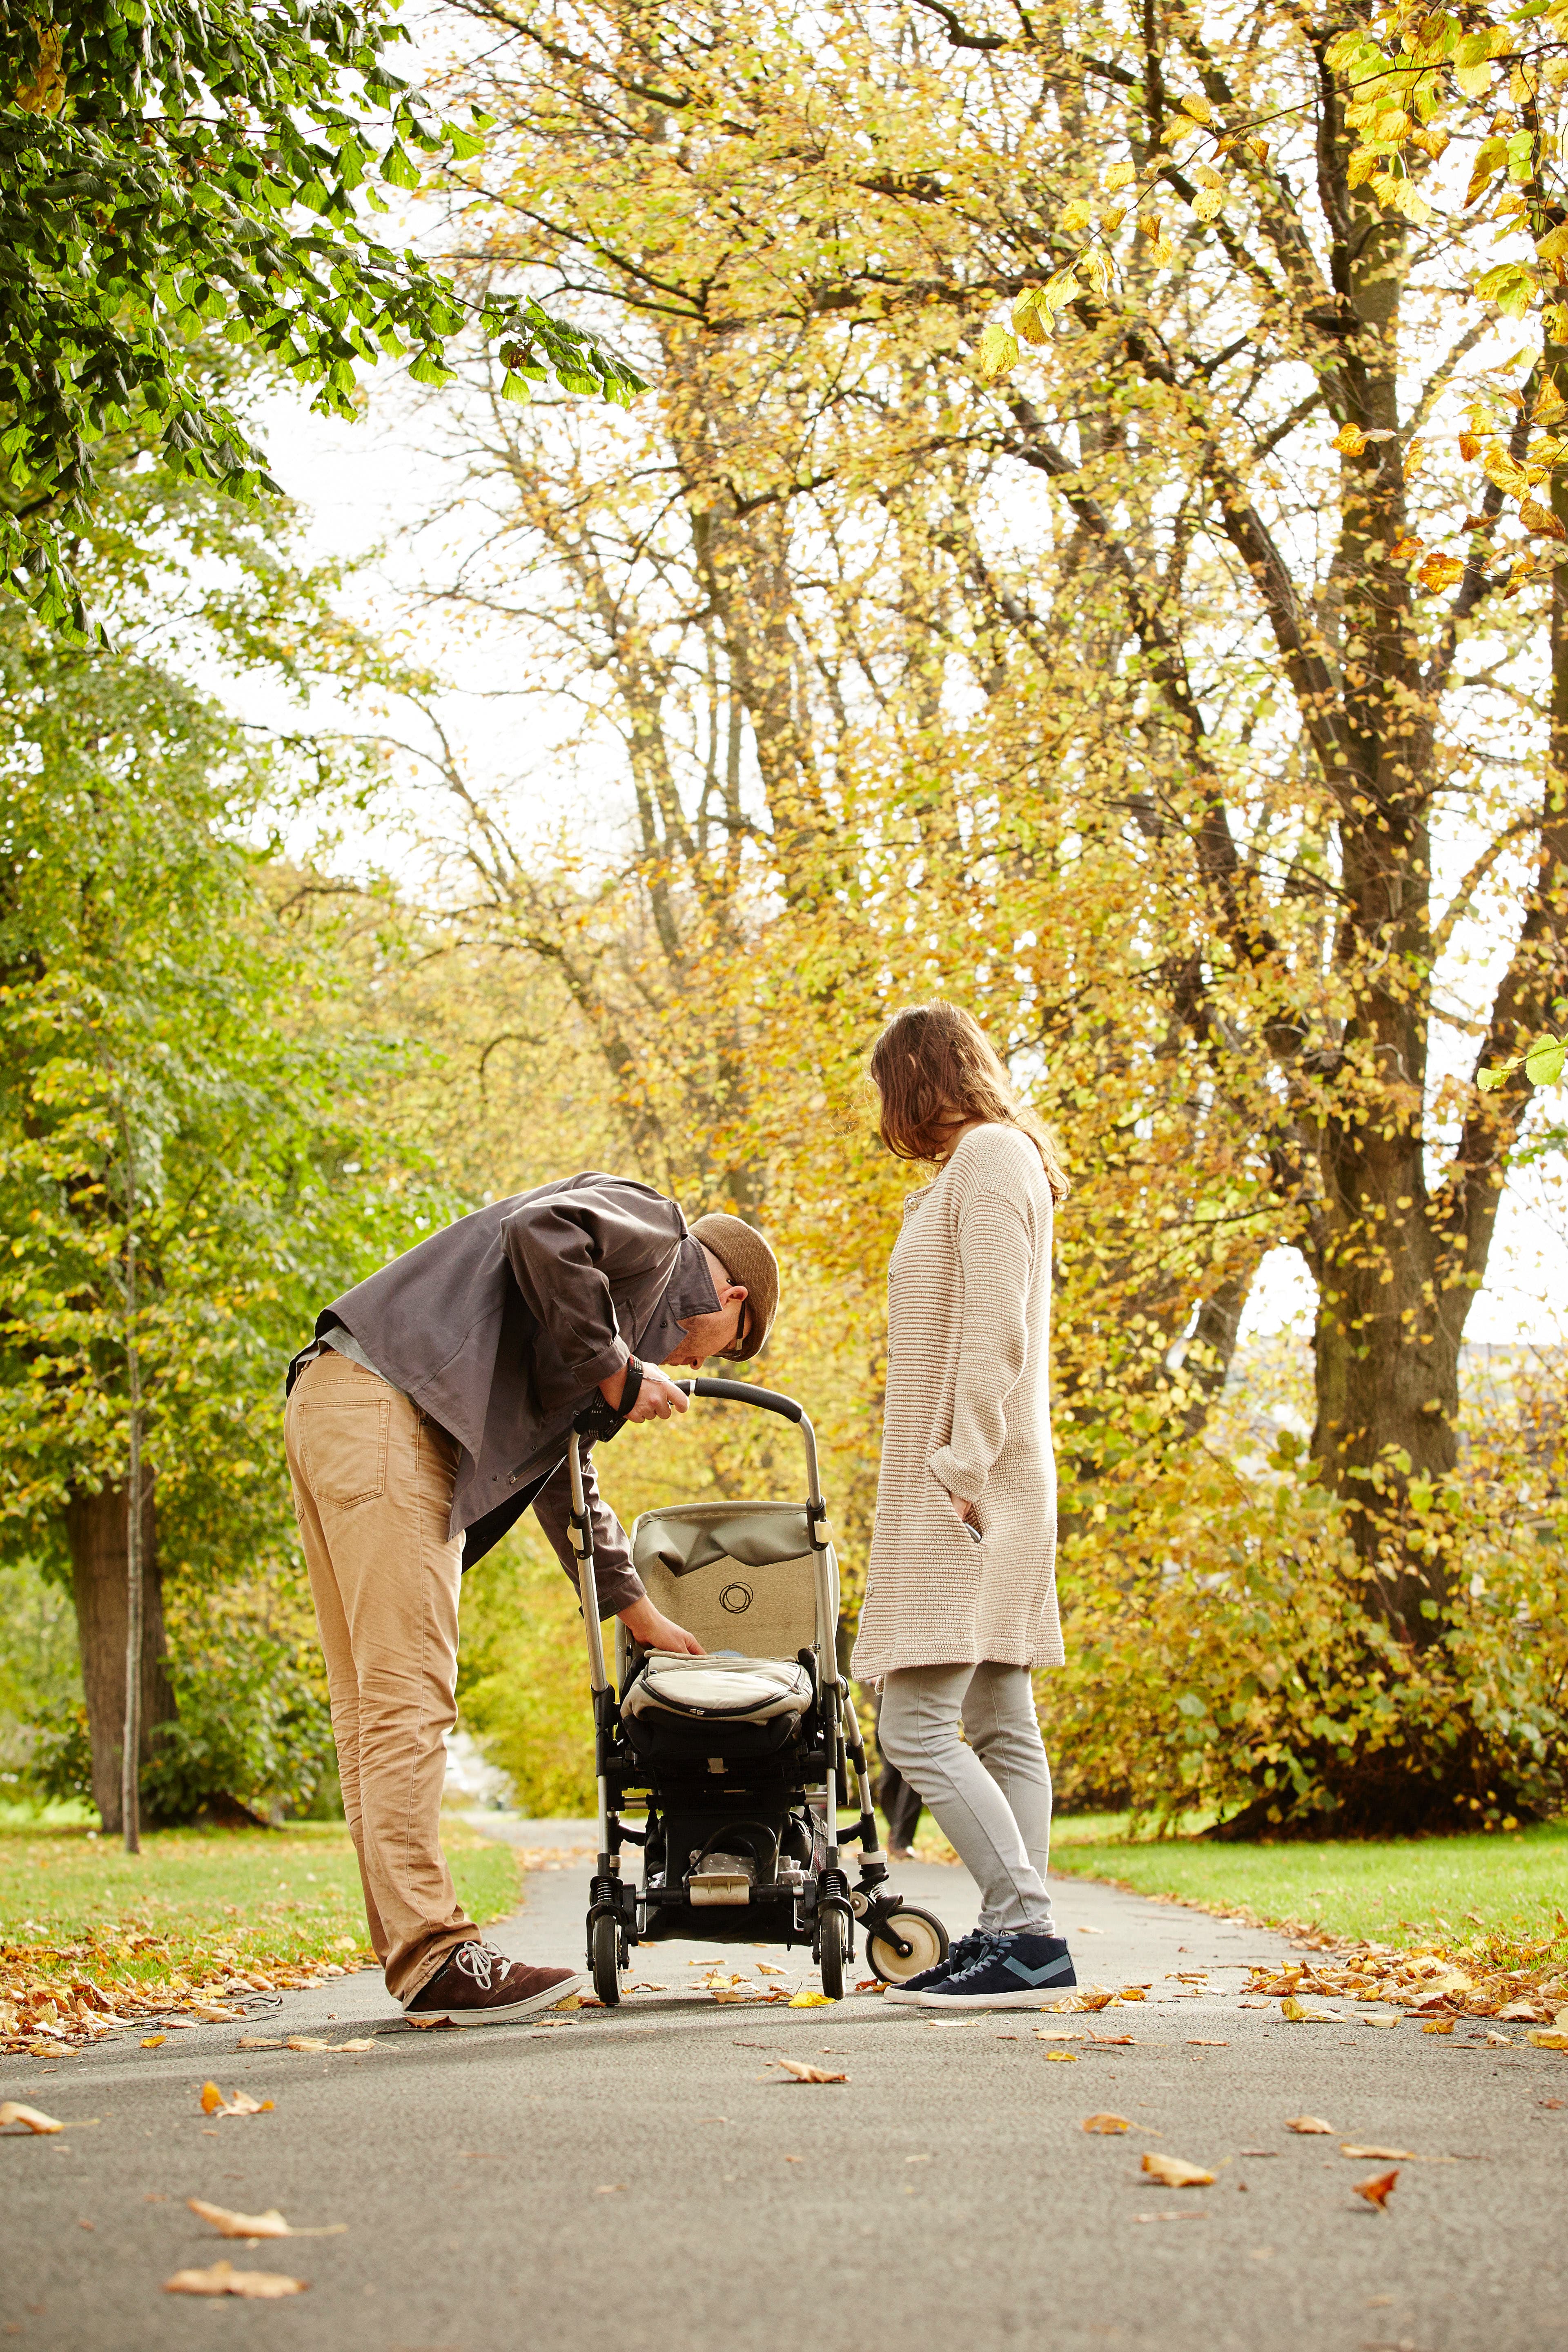 Parents with buggy in Autumn